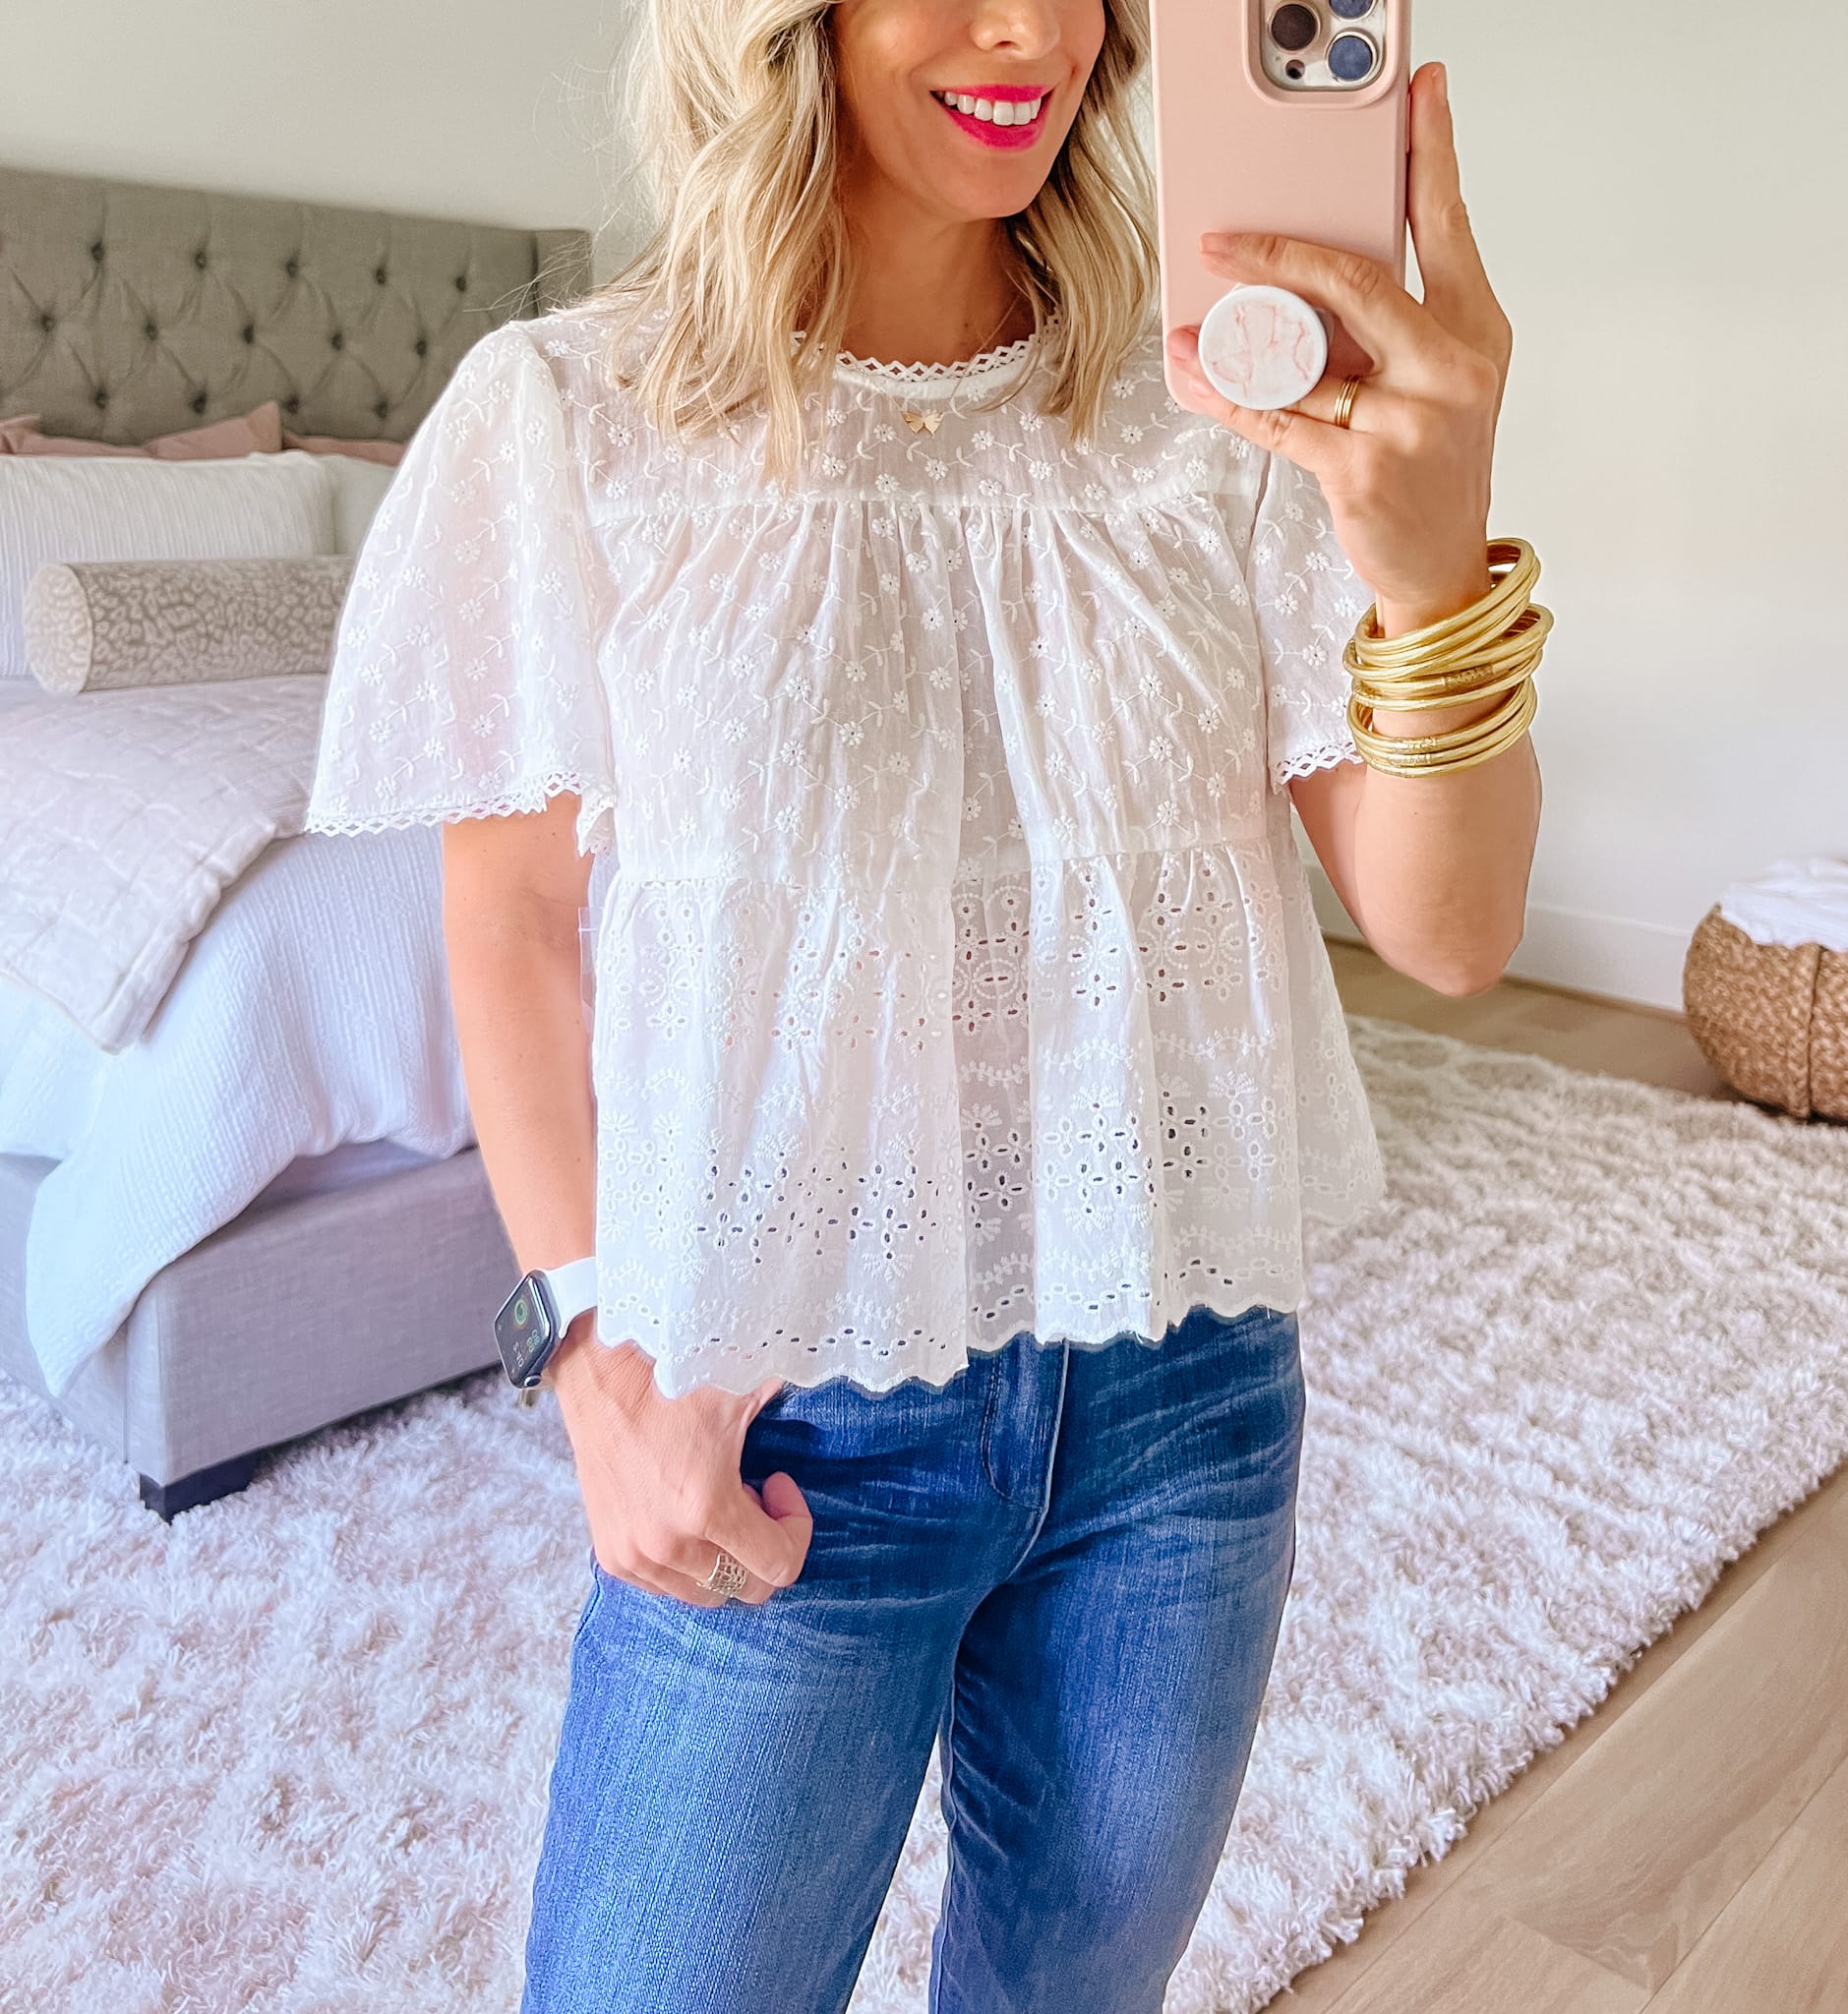 Eyelet Top, Jeans